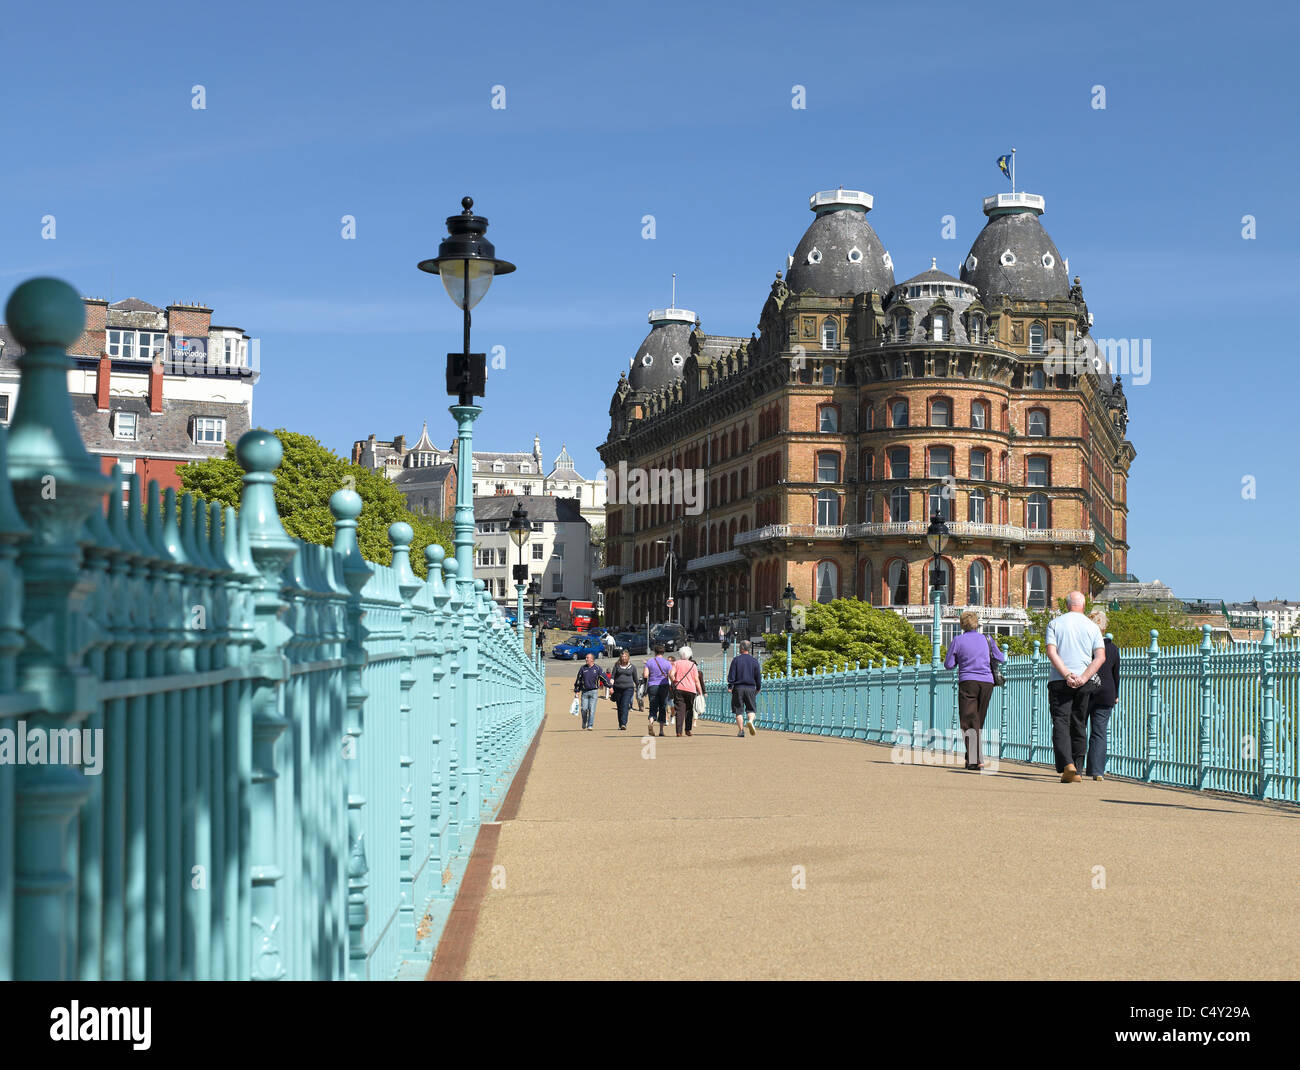 People tourists visitors walking across the Spa Bridge and the Grand Hotel South Bay Scarborough North Yorkshire England UK United Kingdom Britain Stock Photo